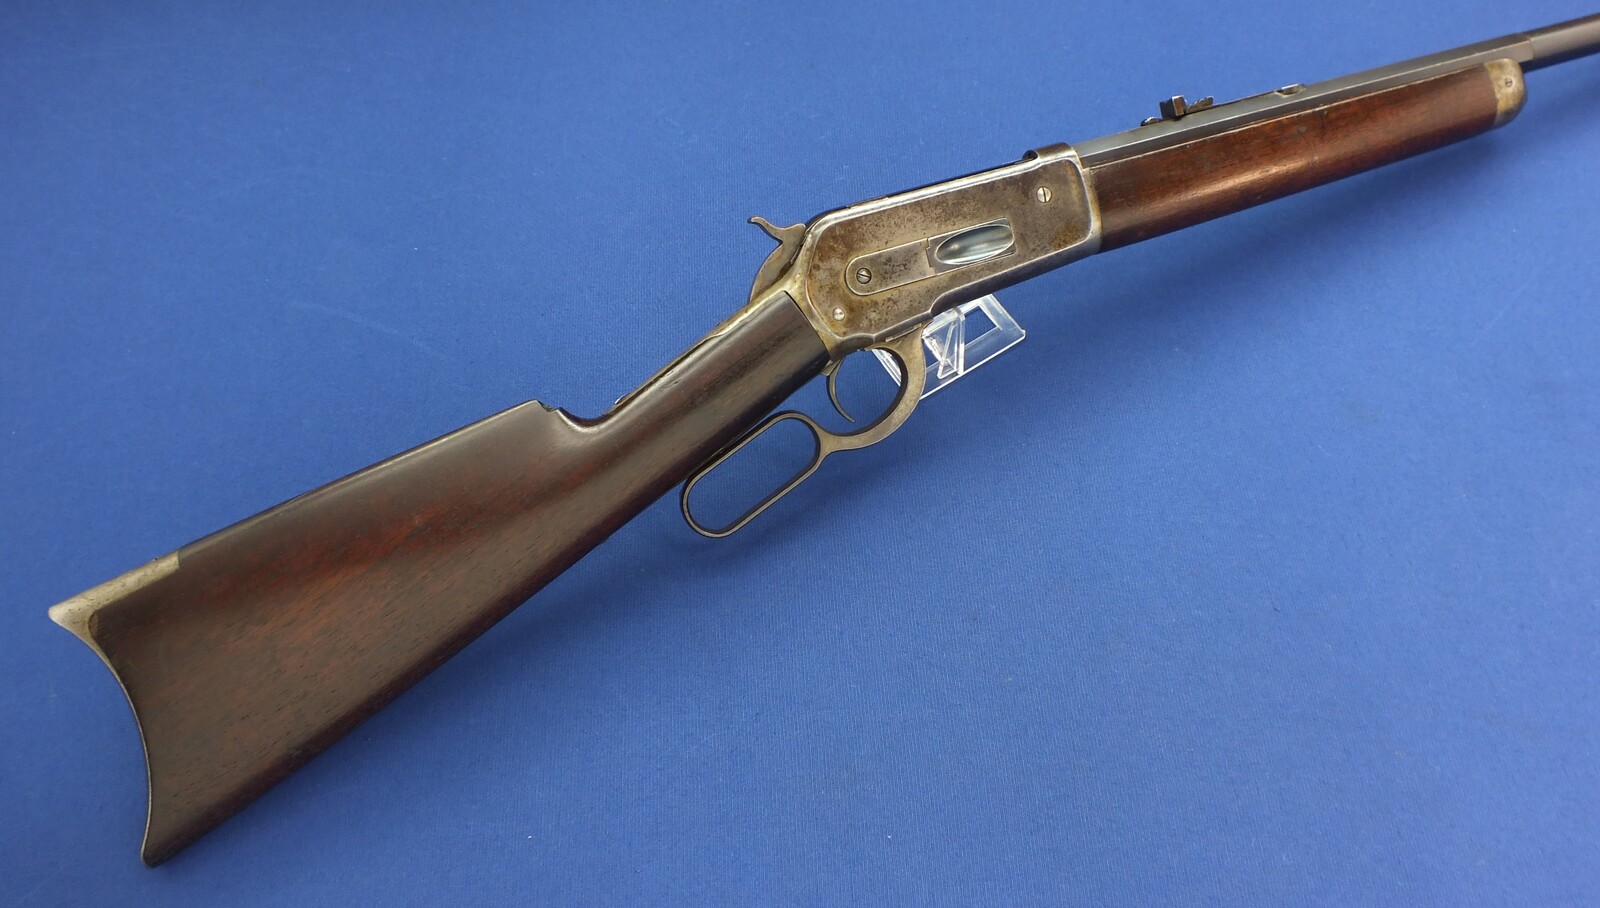 A fine antique American Winchester Model 1886 Sporting Rifle with 24 inch half round - half  octagonal Barrel. Caliber 40-82 W.C.F. Length 109cm. In very good condition. Price 5.200 euro